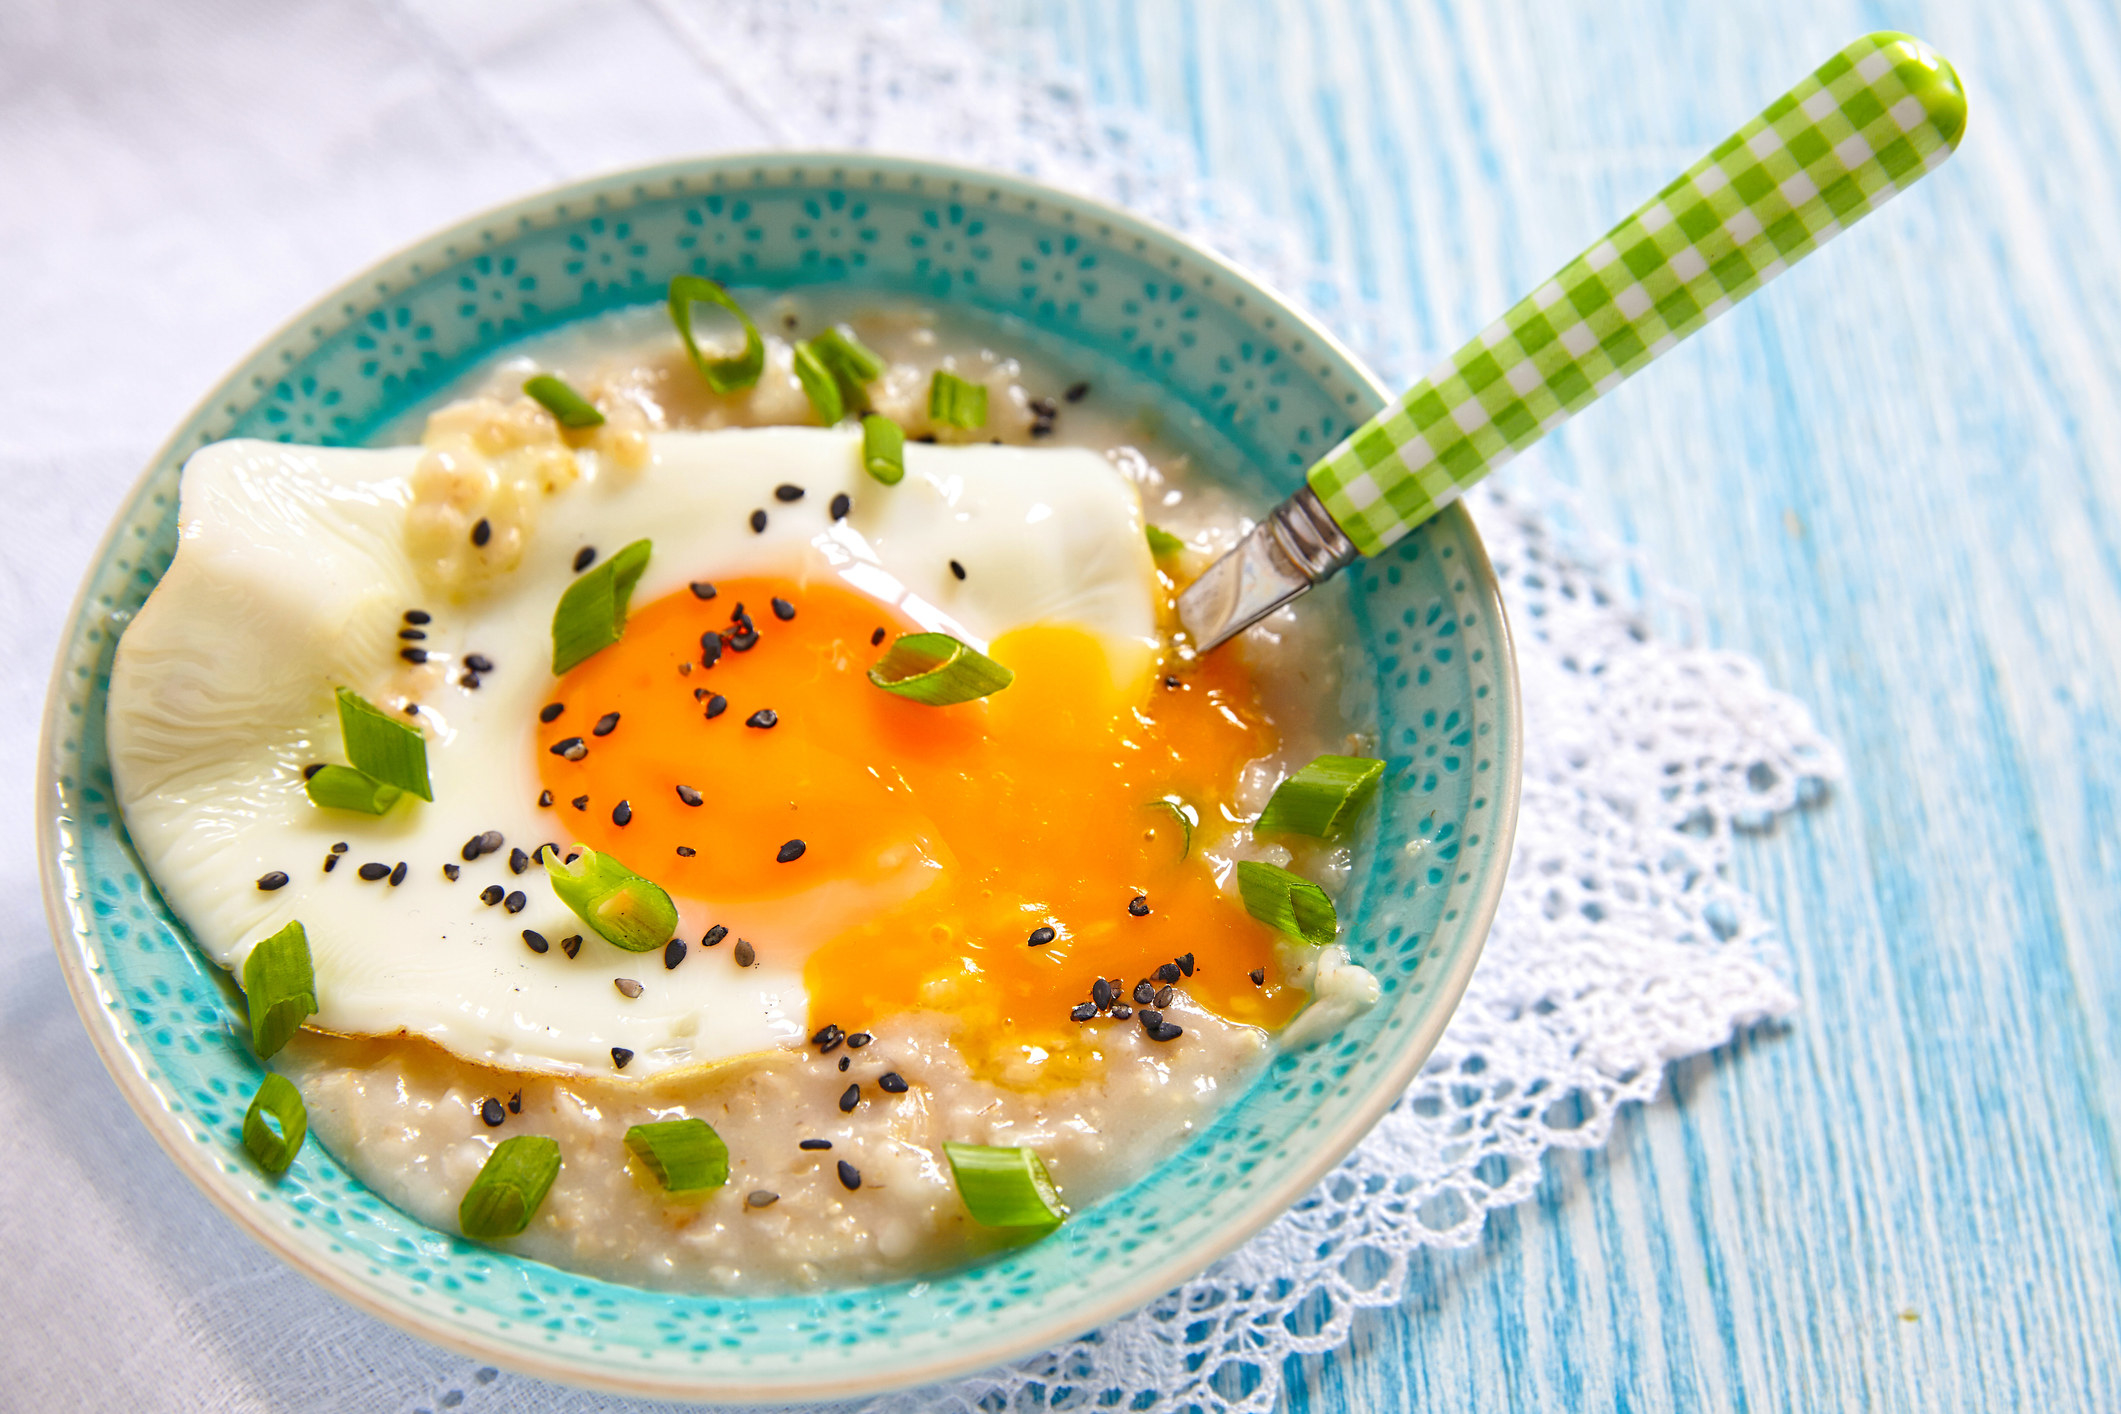 Savory oatmeal with cheese, fried egg and green onion